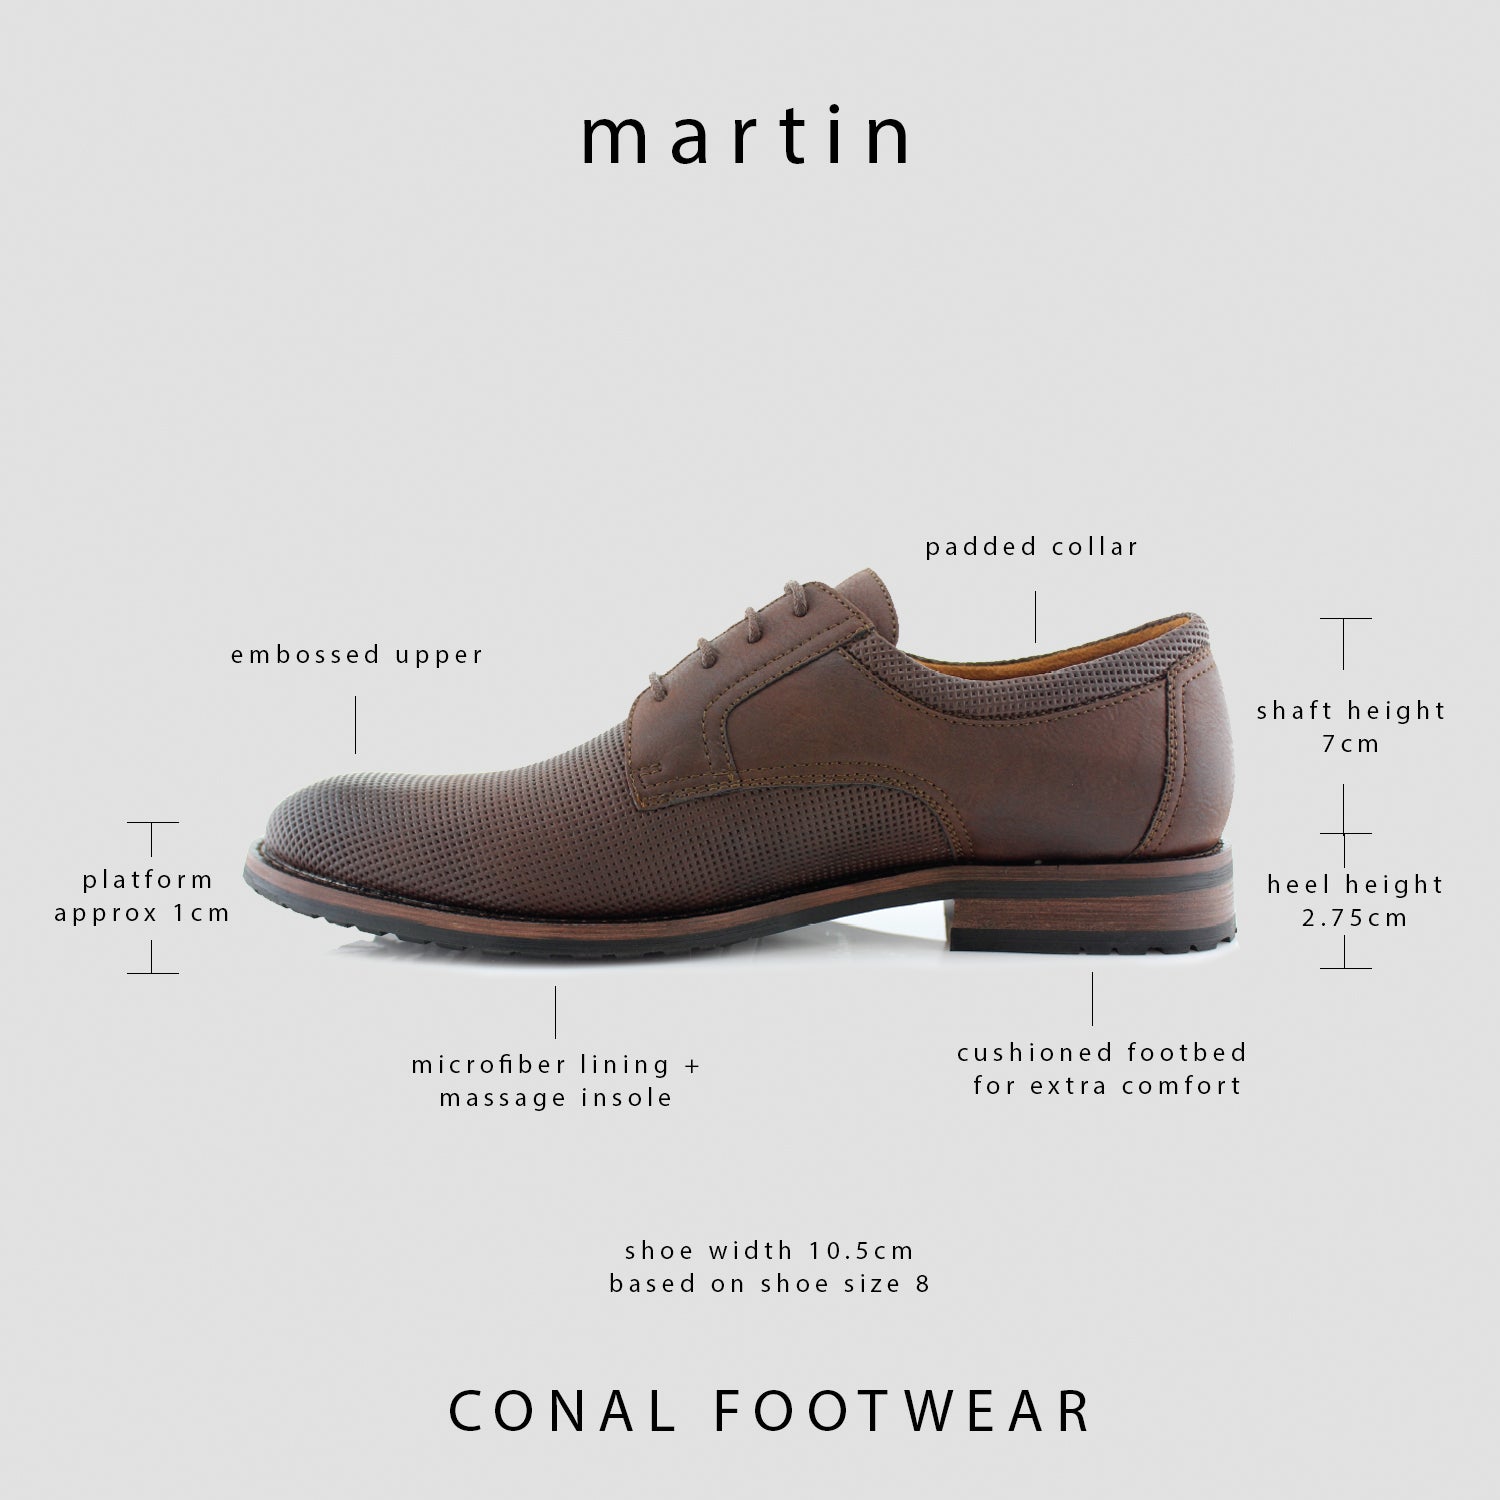 Duo-Textured Embossed Derby Shoes | Martin by Ferro Aldo | Conal Footwear | Overview